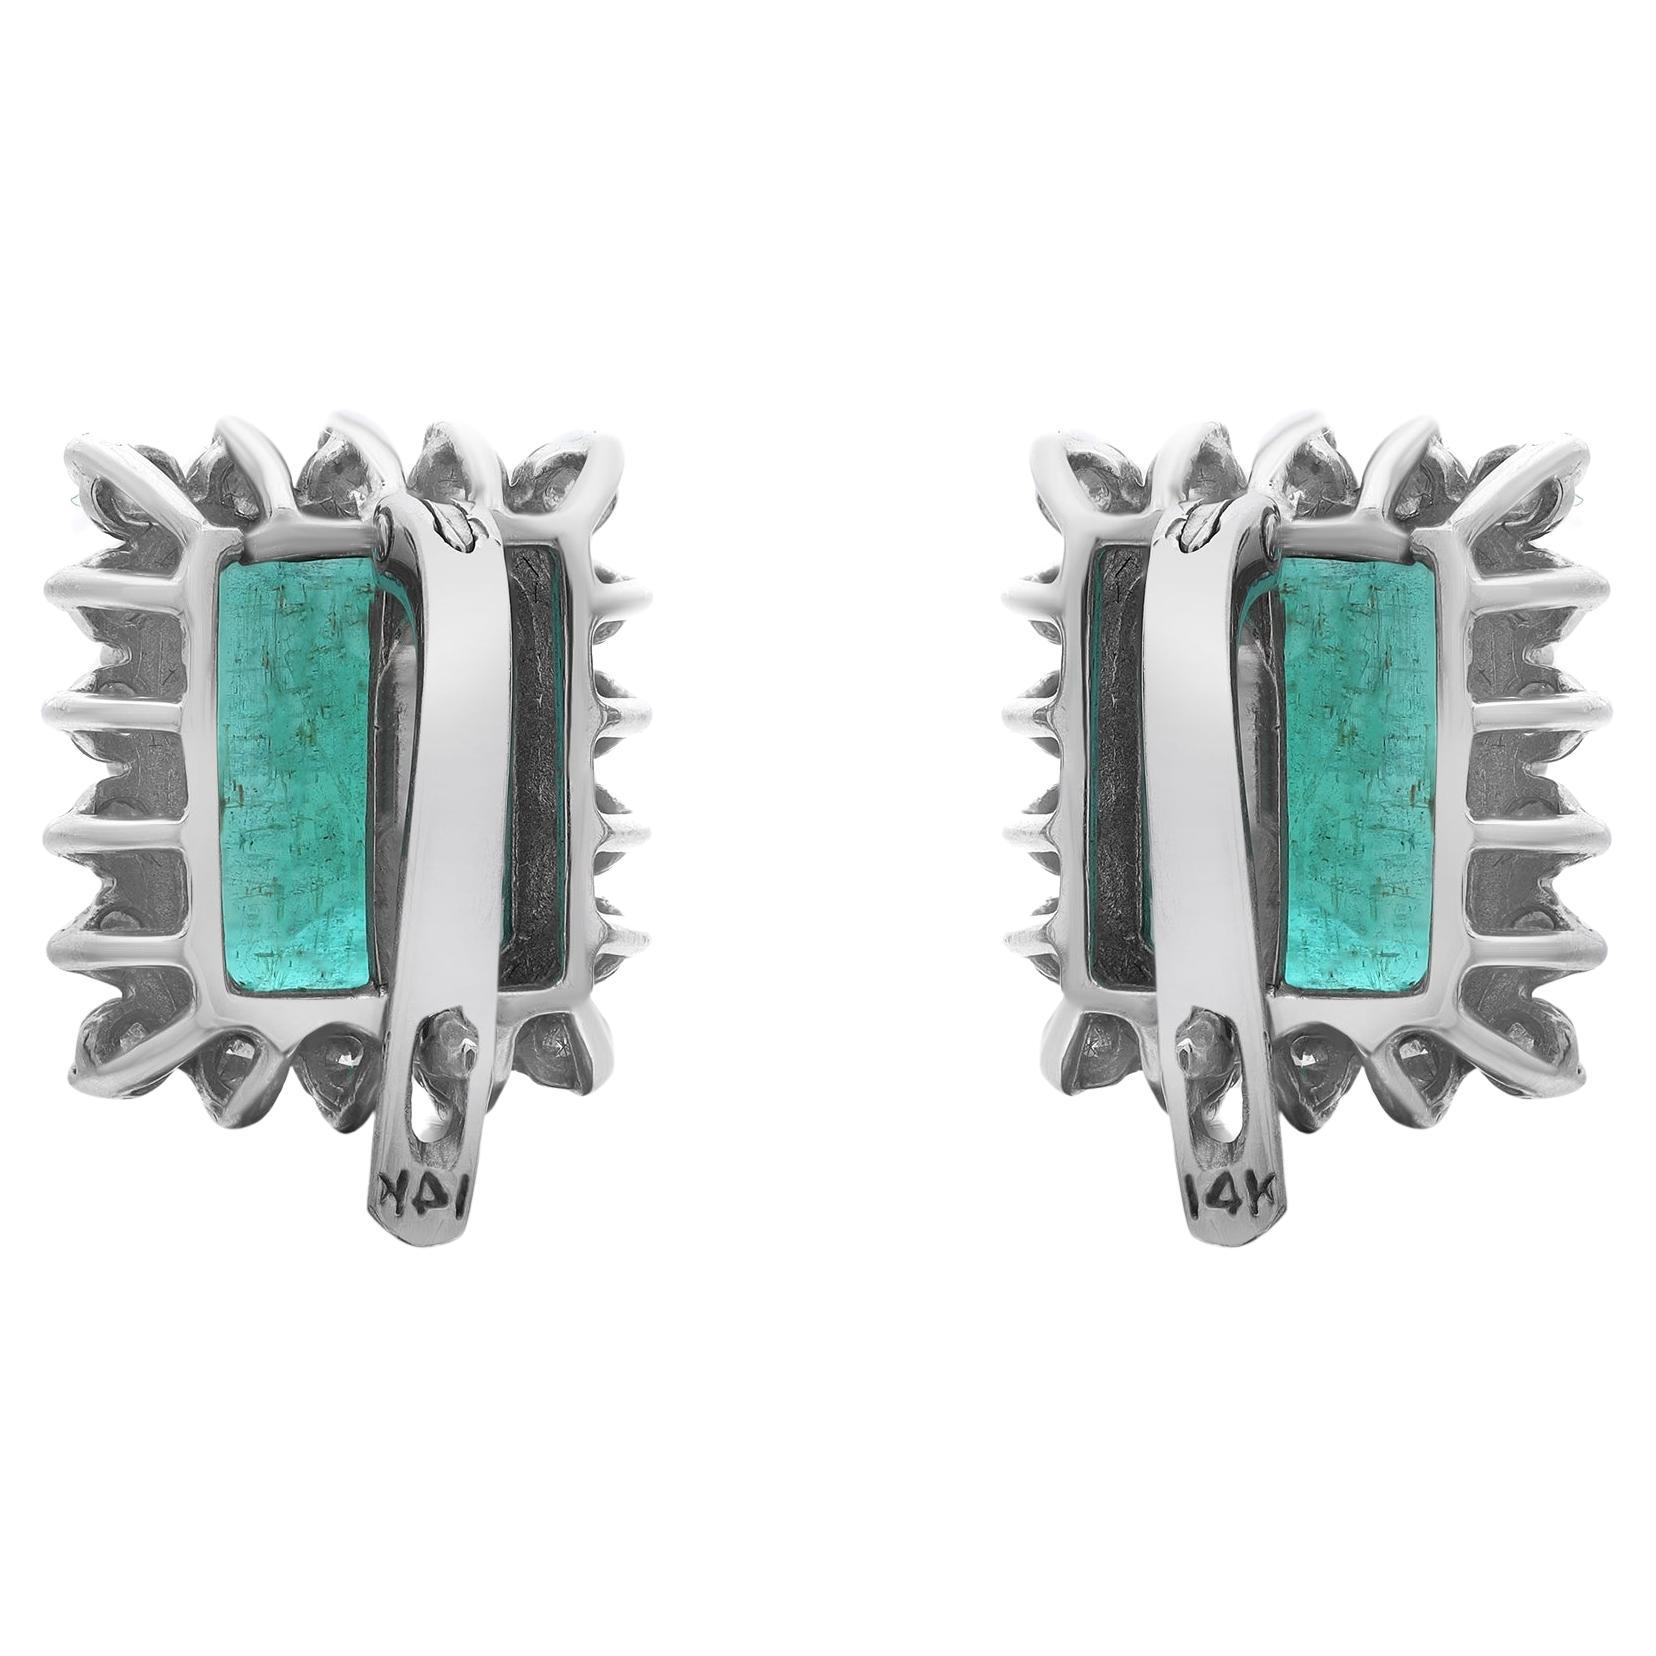 Delight the one you adore with these charming Green Emerald stud earrings. Crafted in high polished 14K white gold. The earrings feature prong set emerald cut emeralds weighing 7.00 carats with shimmering round brilliant cut diamonds weighing 1.08